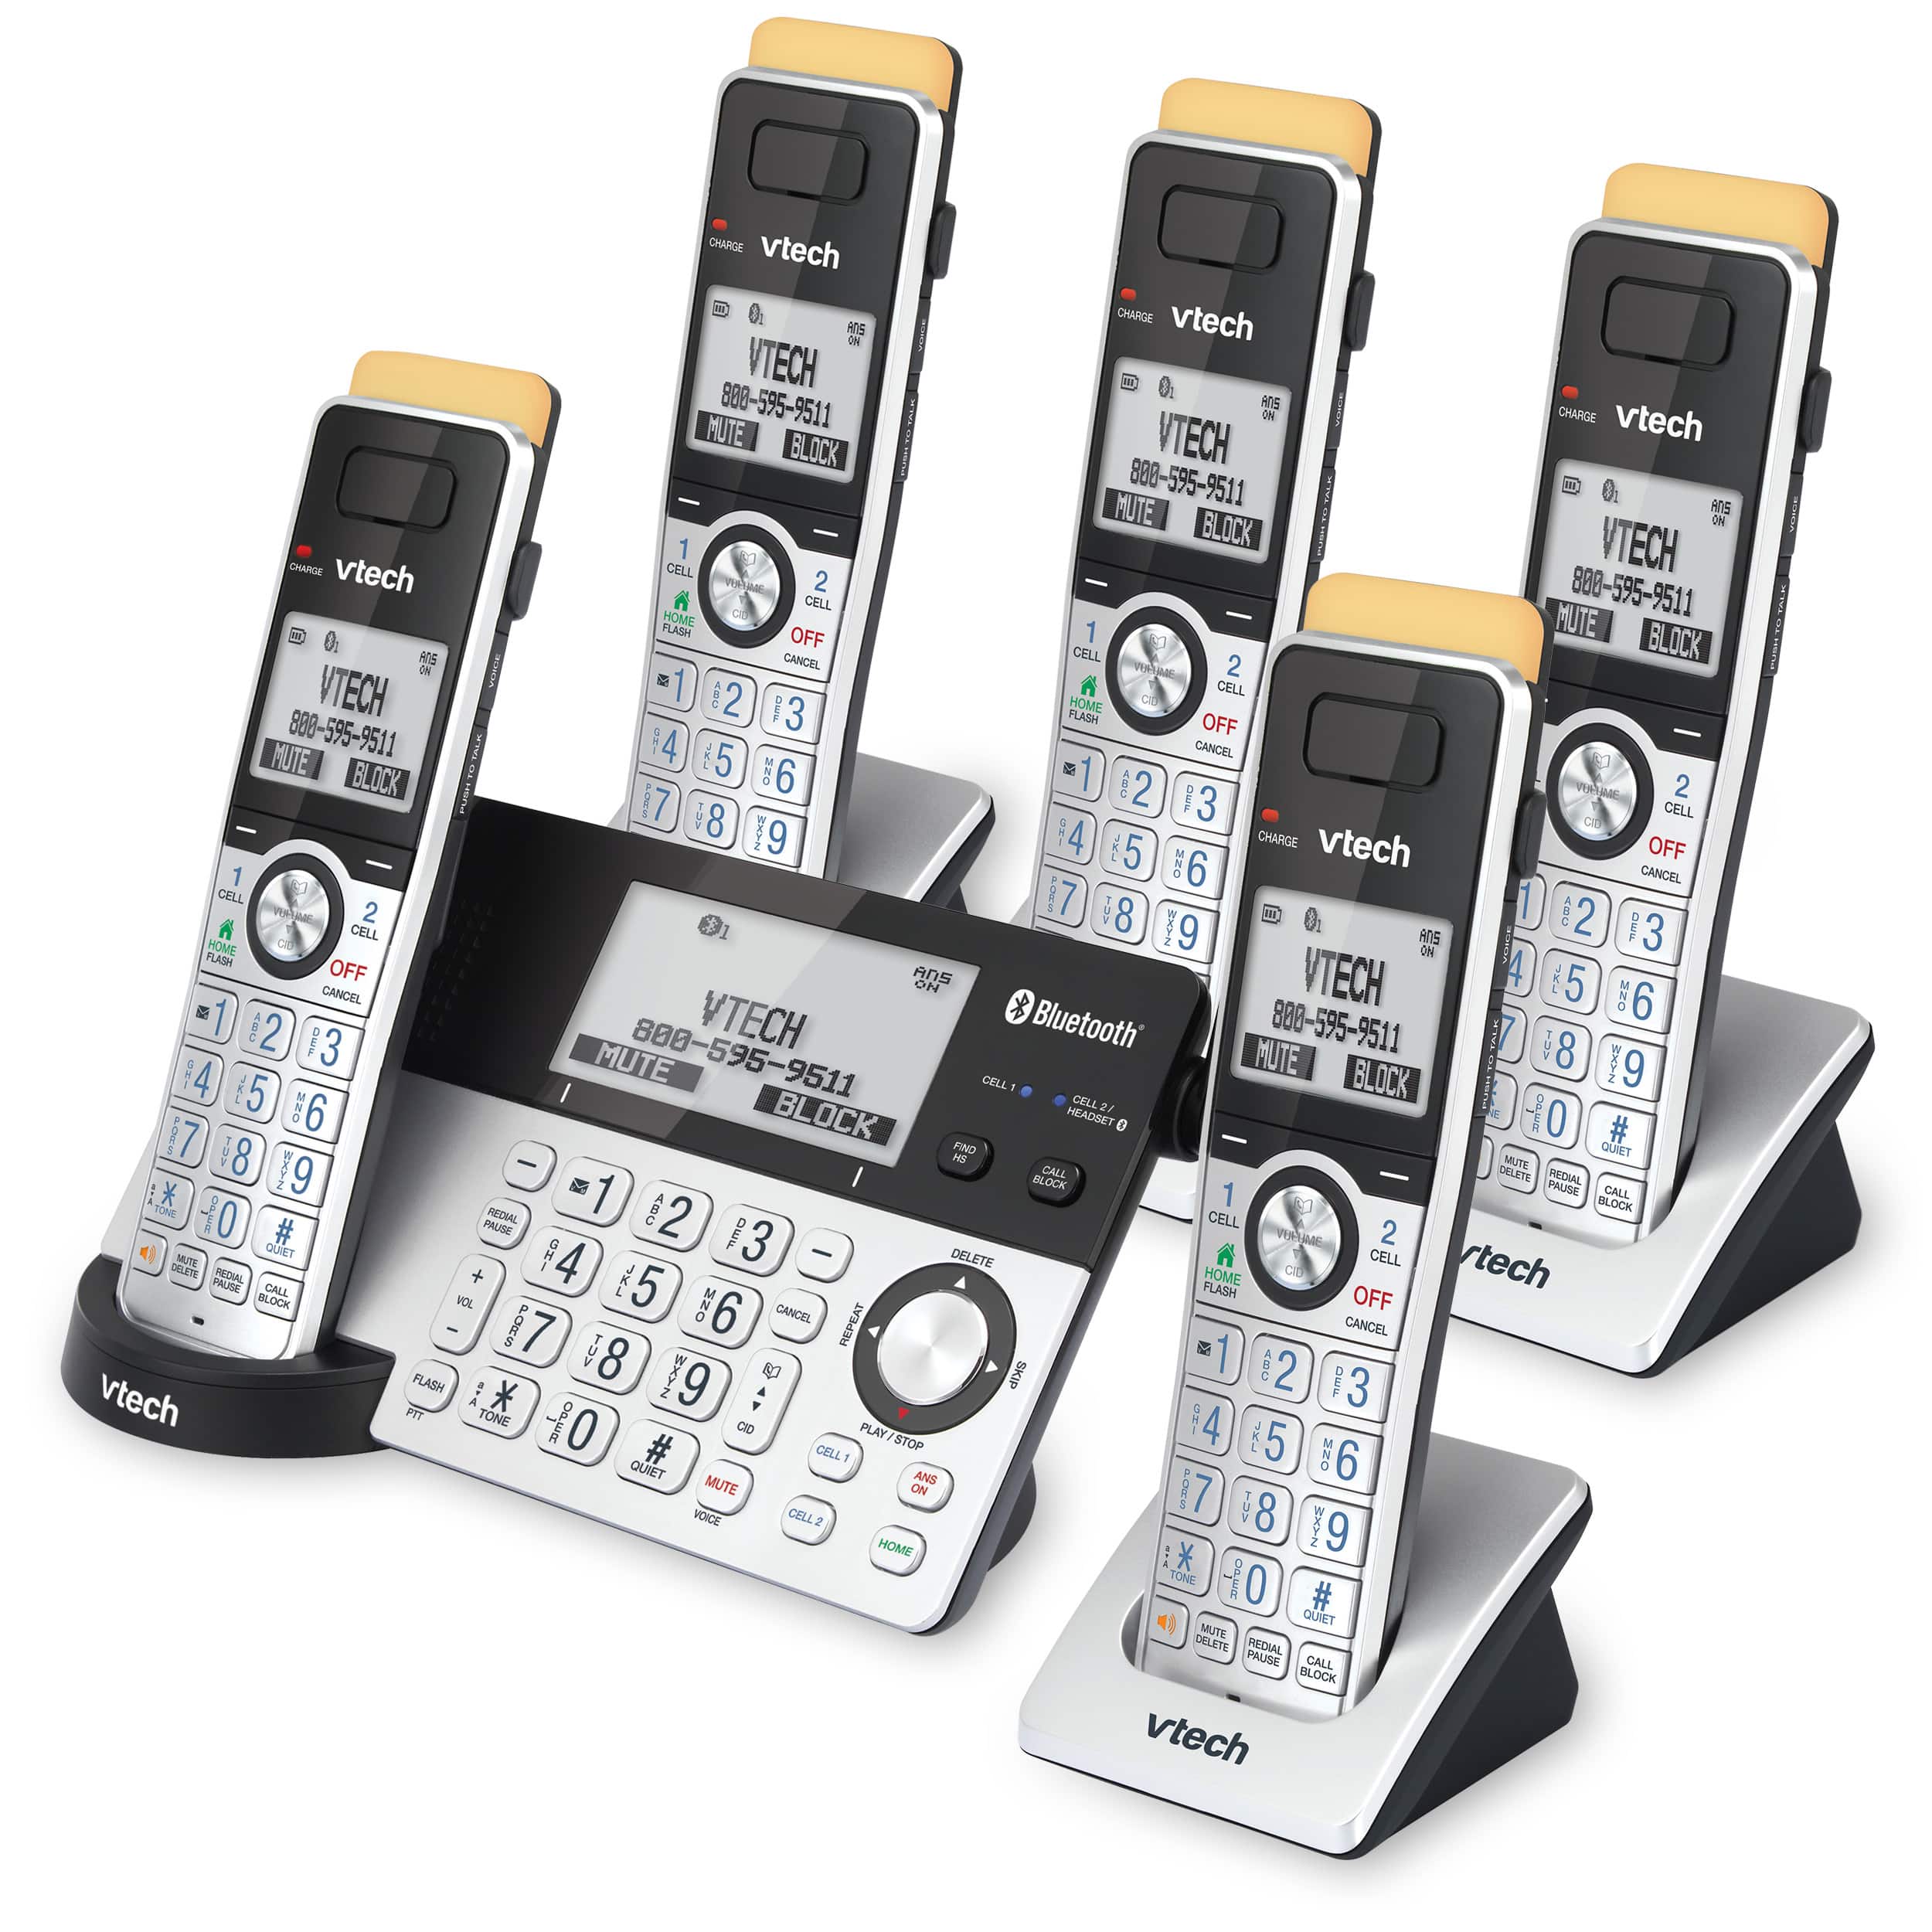 5-Handset Expandable Cordless Phone with Super Long Range, Bluetooth Connect to Cell, Smart Call Blocker and Answering System, IS8151-5 - view 2